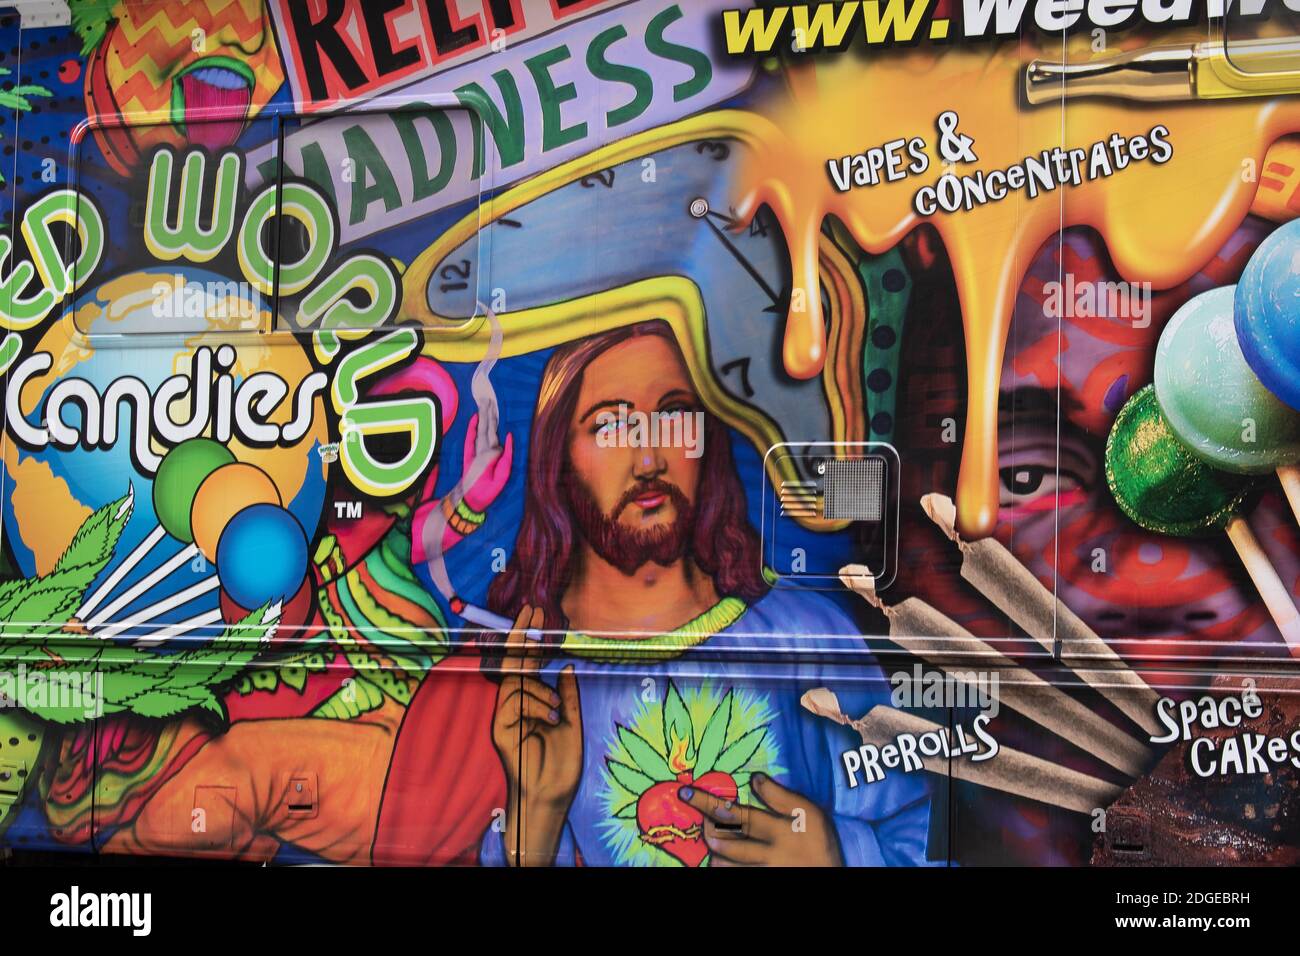 Weed World Ad on a Truck of Jesus Smoking Weed Stock Photo